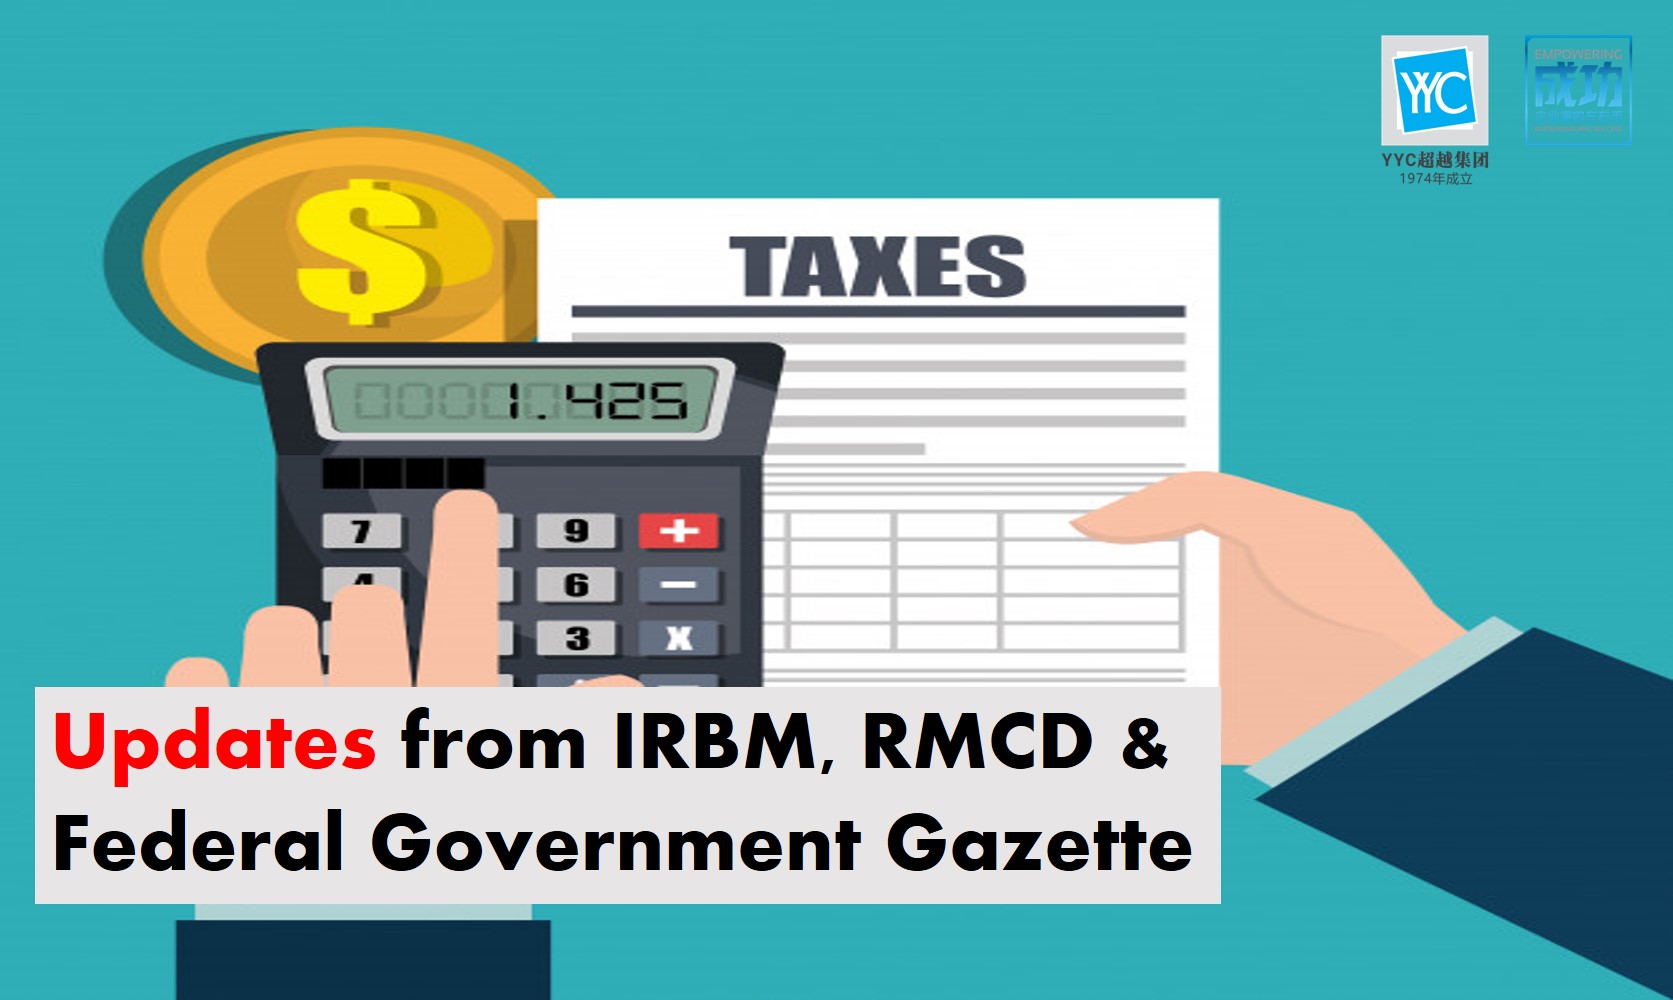 We provide Updates from IRBM, RMCD & Federal Government Gazette   